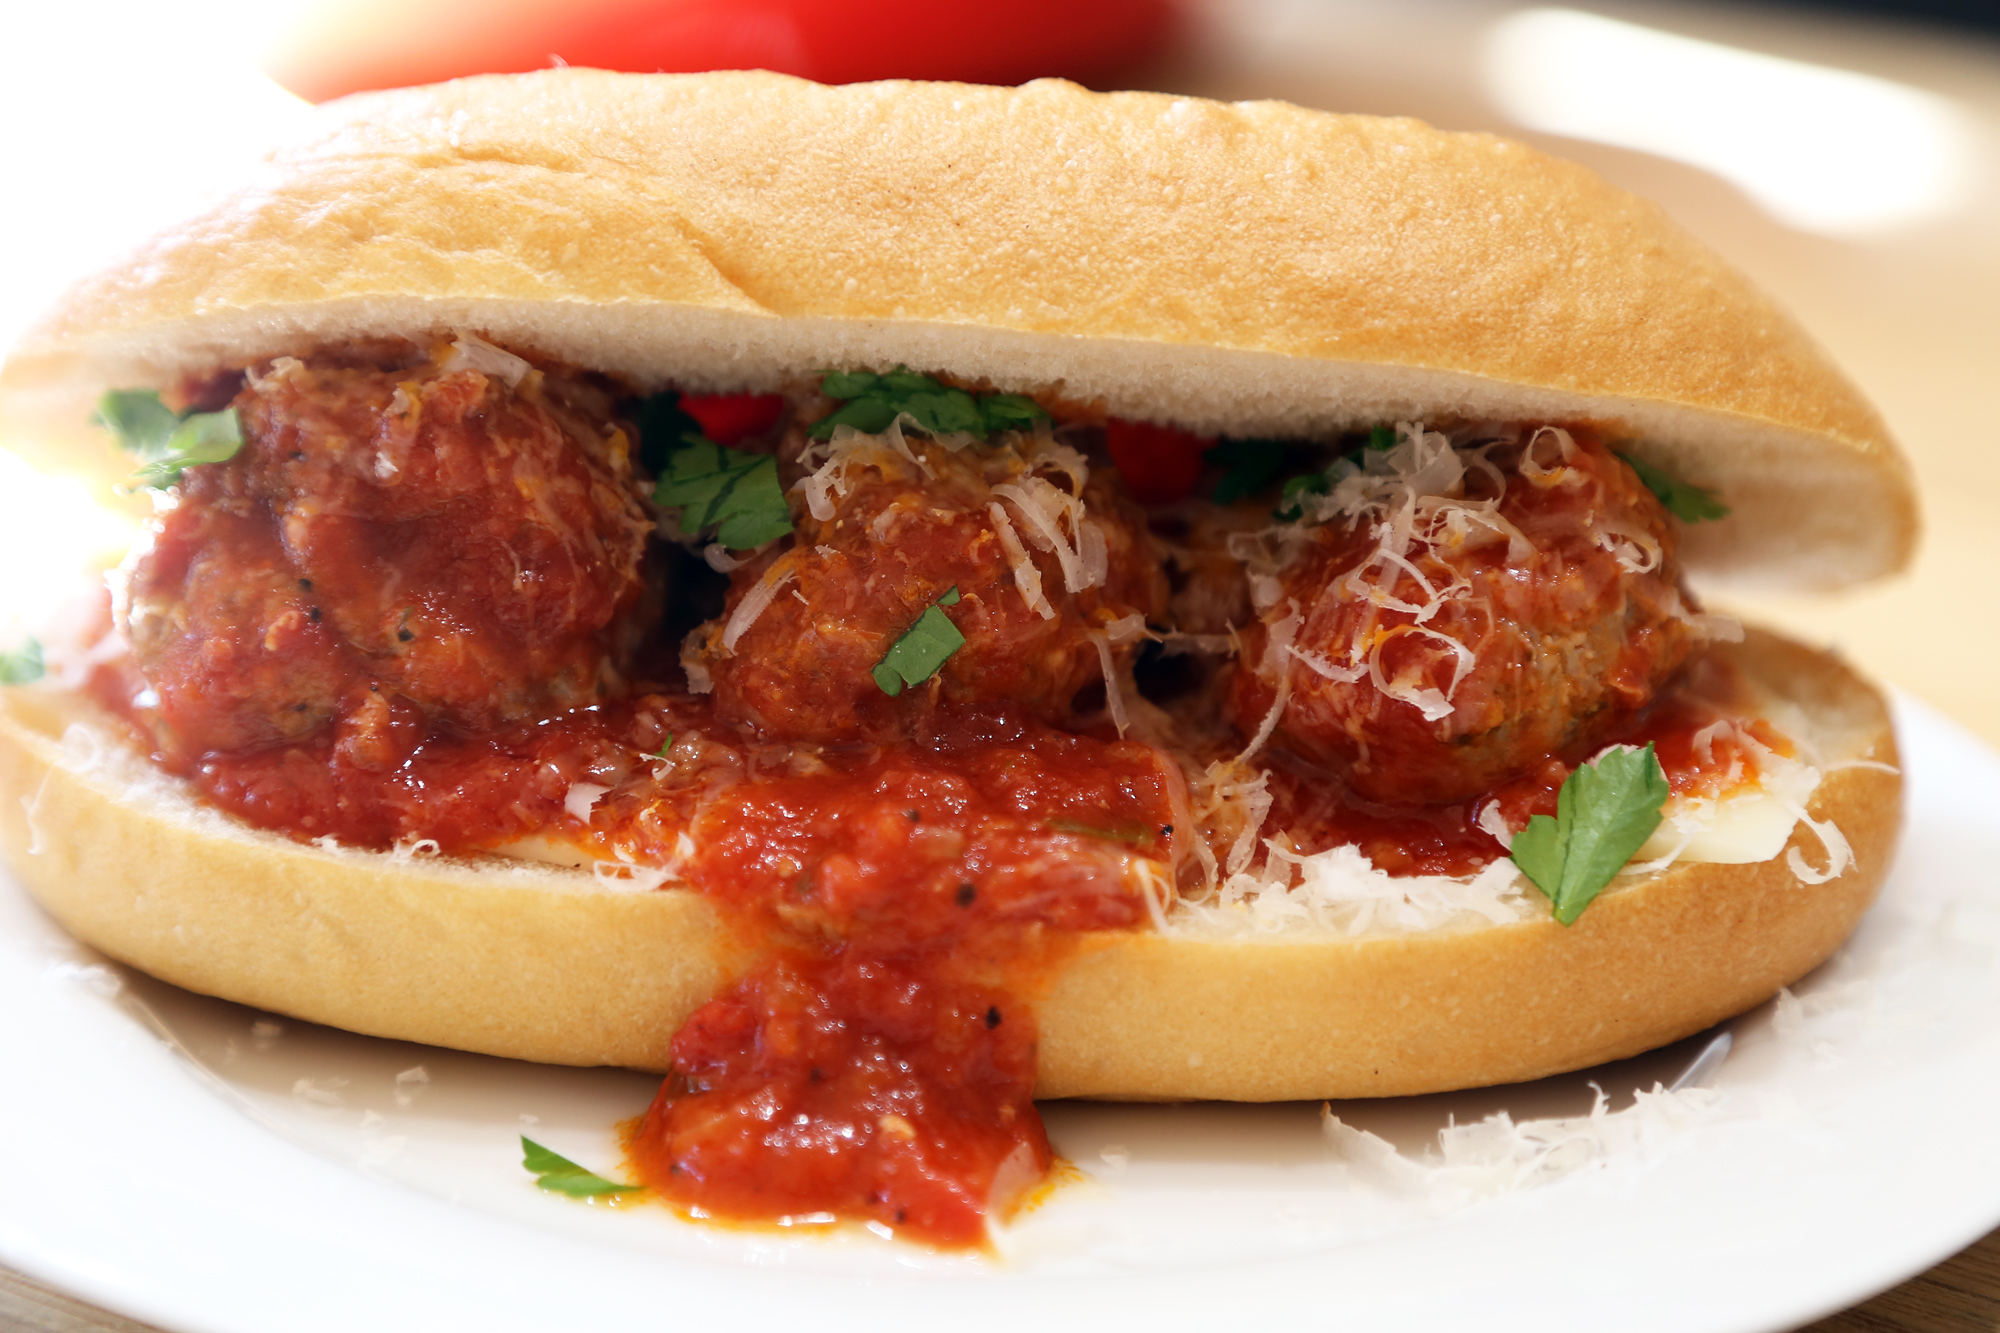 Homemade Meatball Sandwiches with Provolone